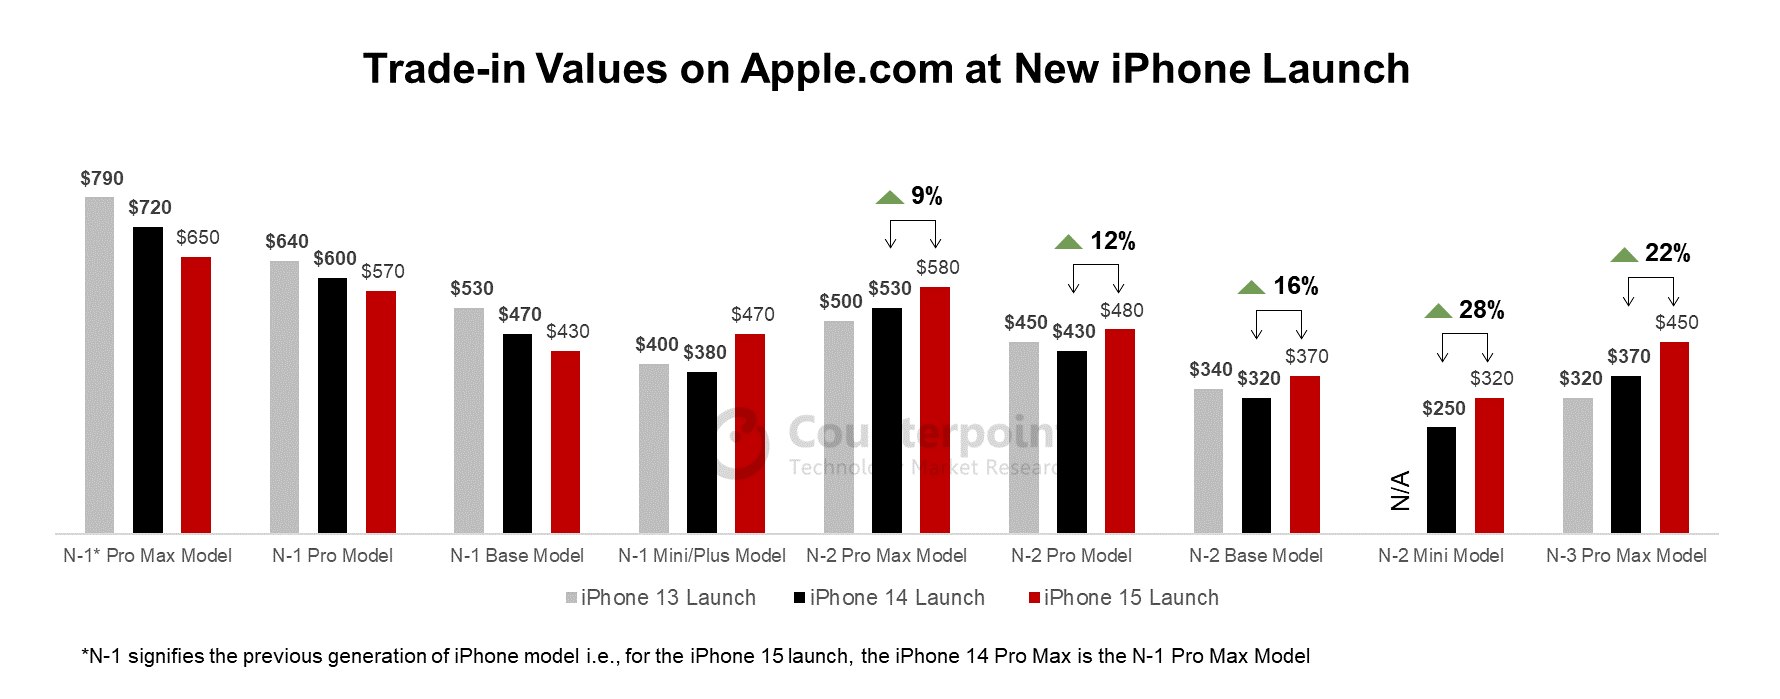 Trade-in Values for iPhones on Apple.com